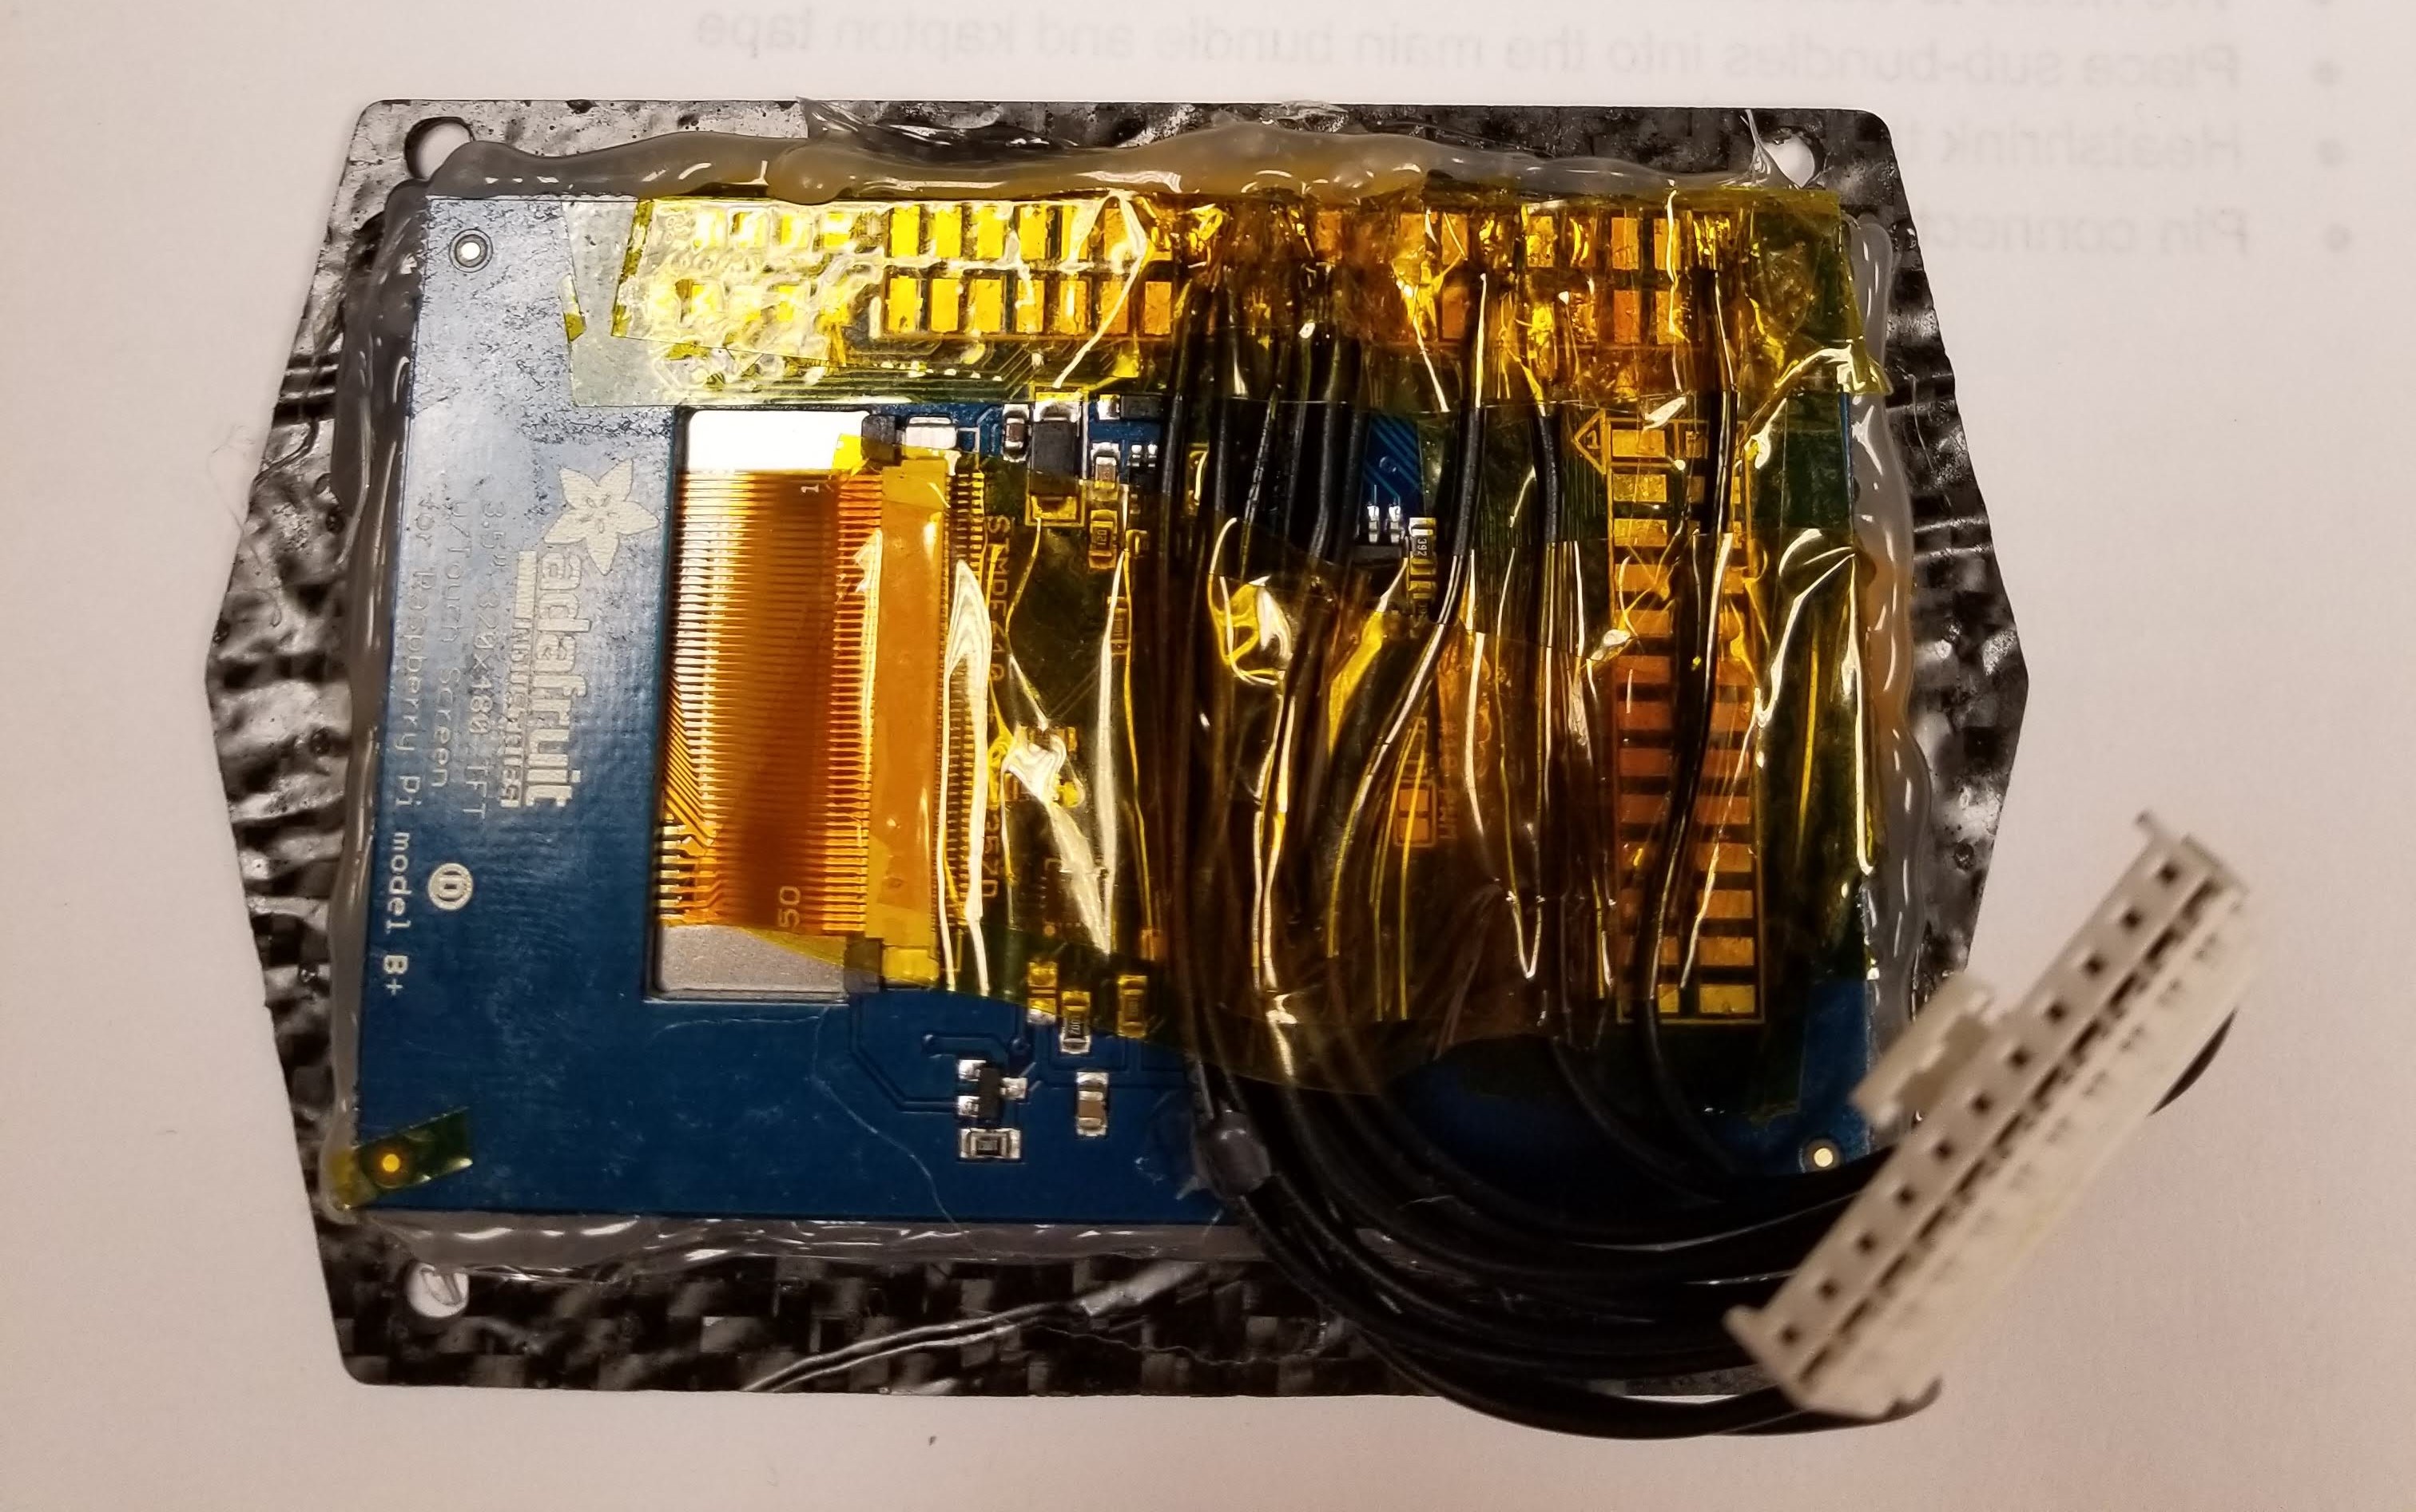 A picture of the touchscreen that connects to the PCB